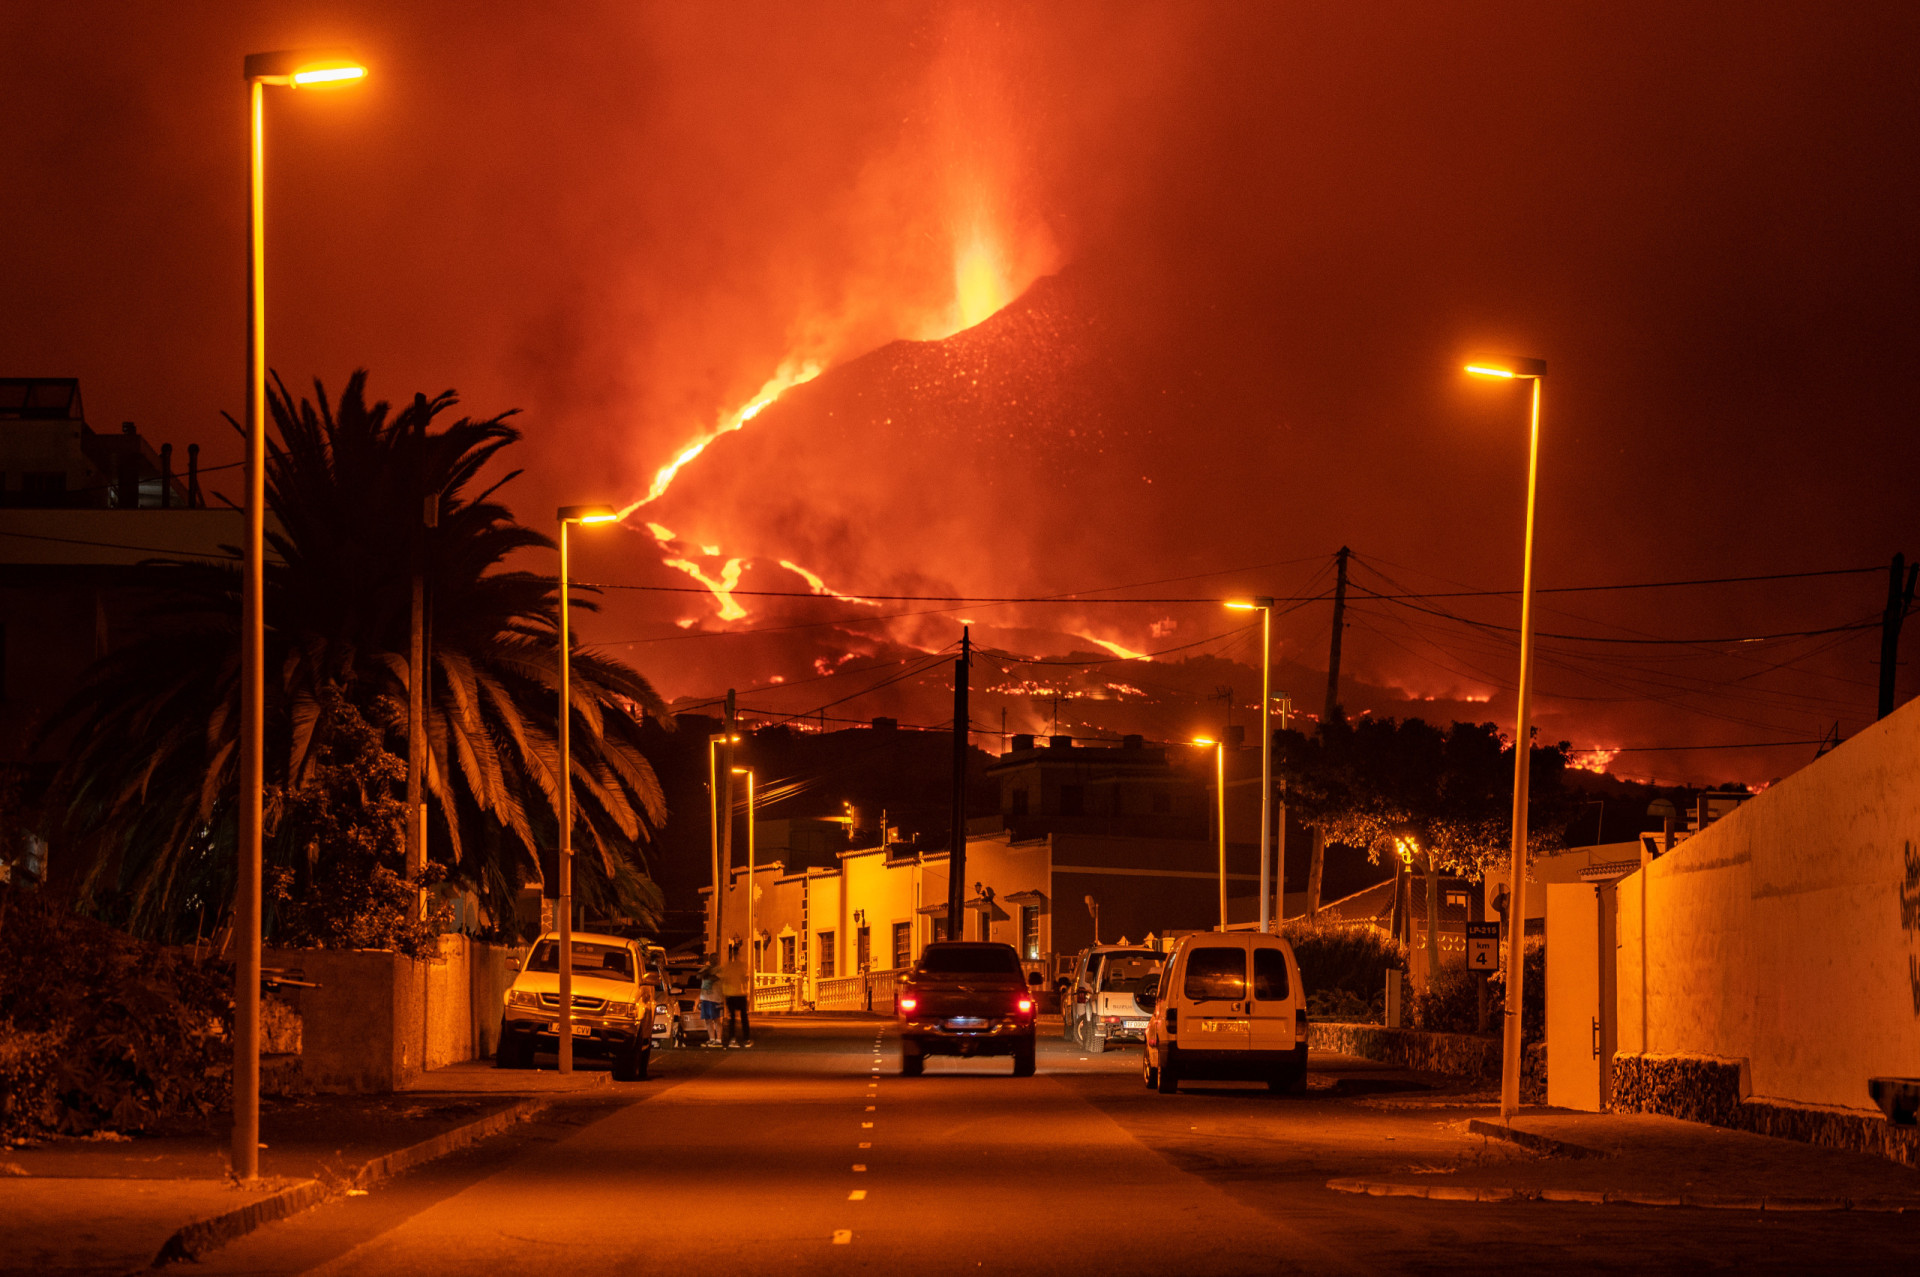 <p>Cumbre Vieja on the island of La Palma in the Canary Islands rumbled into life in September 2021 to threaten several neighborhoods with  voluminous lava flows. In fact, thousands of buildings were destroyed by red hot magma and the airport was forced to close twice due to volcanic ash.</p><p><a href="https://www.msn.com/en-us/community/channel/vid-7xx8mnucu55yw63we9va2gwr7uihbxwc68fxqp25x6tg4ftibpra?cvid=94631541bc0f4f89bfd59158d696ad7e">Follow us and access great exclusive content every day</a></p>